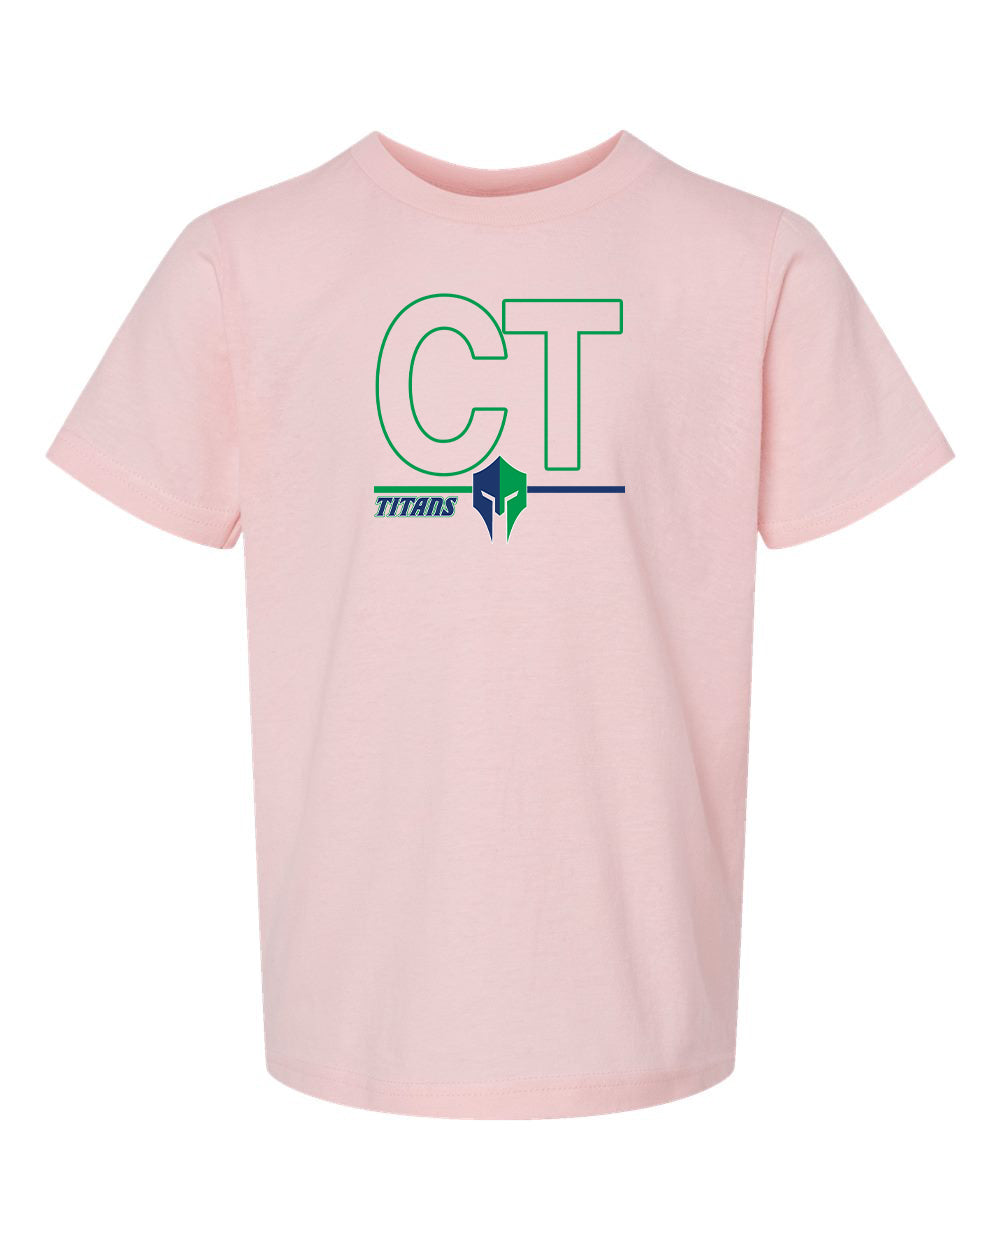 Titans Youth Jersey Tee "CT" - 235 (color options available)